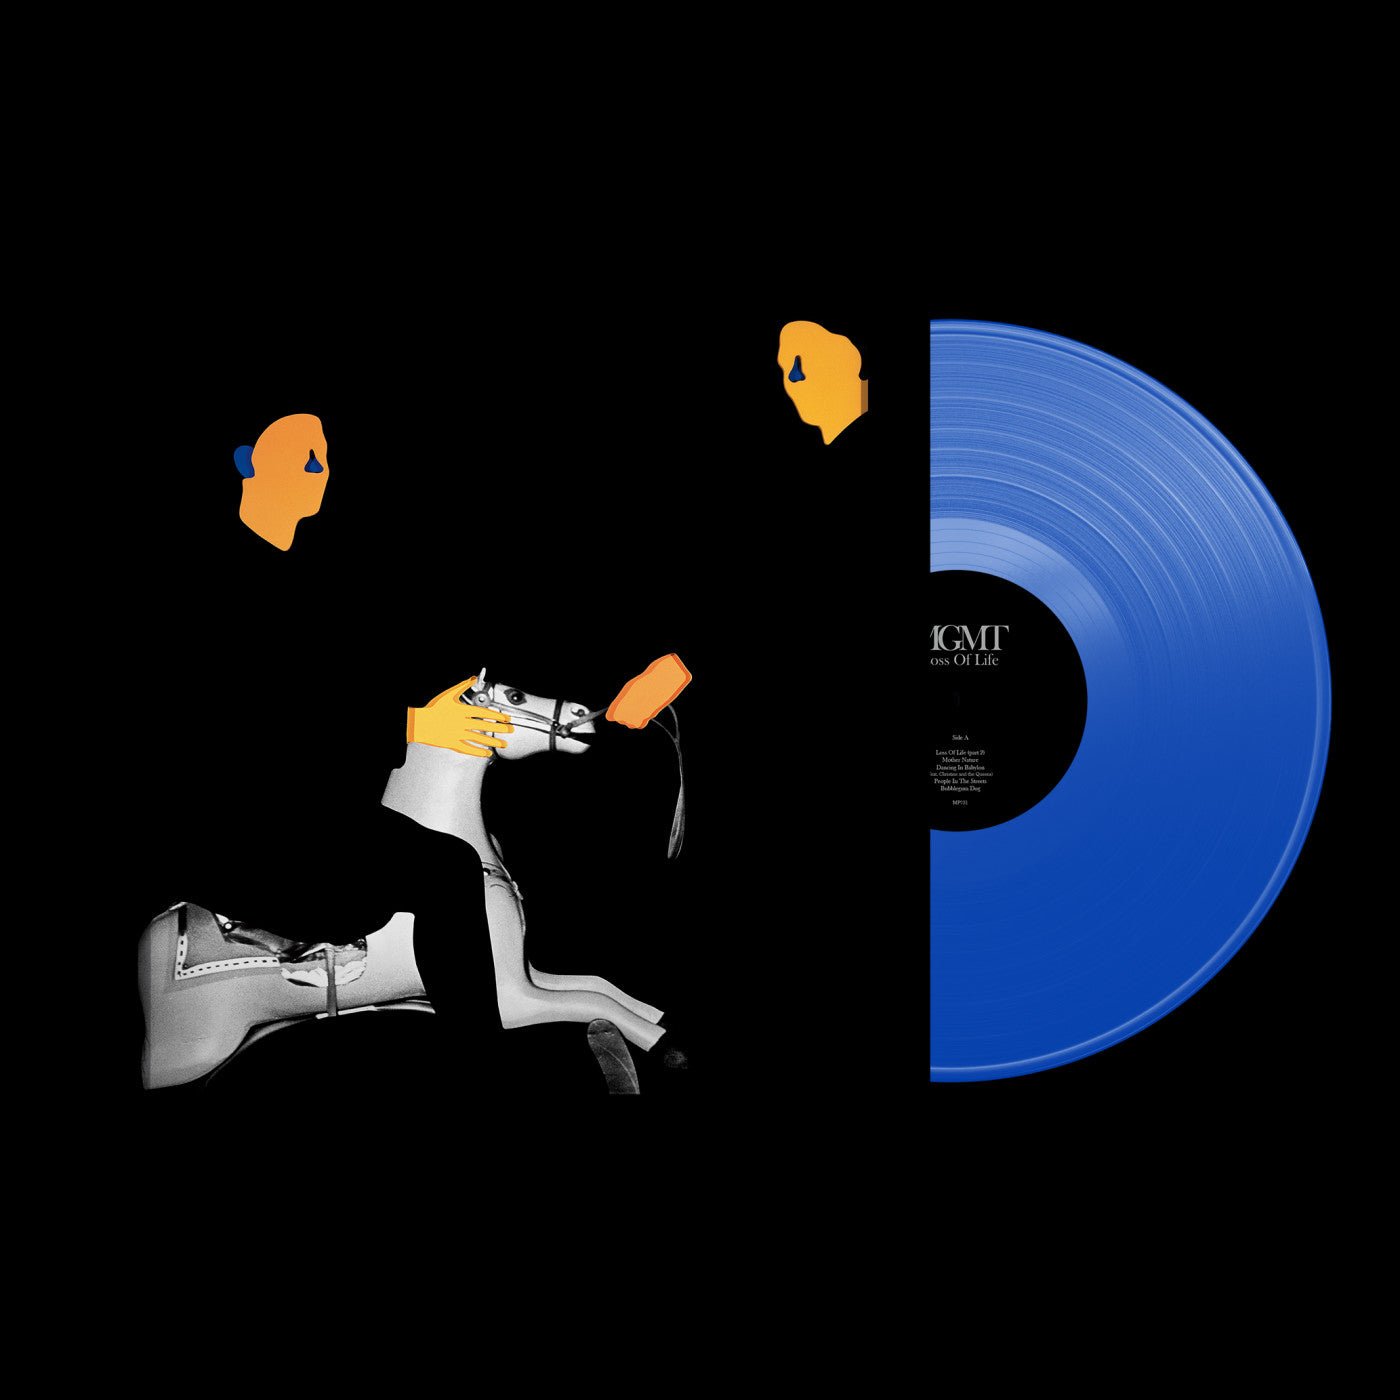 MGMT - Loss Of Life (Indie Exclusive, Blue Jay Opaque Vinyl) - 810090094038 - LP's - Yellow Racket Records